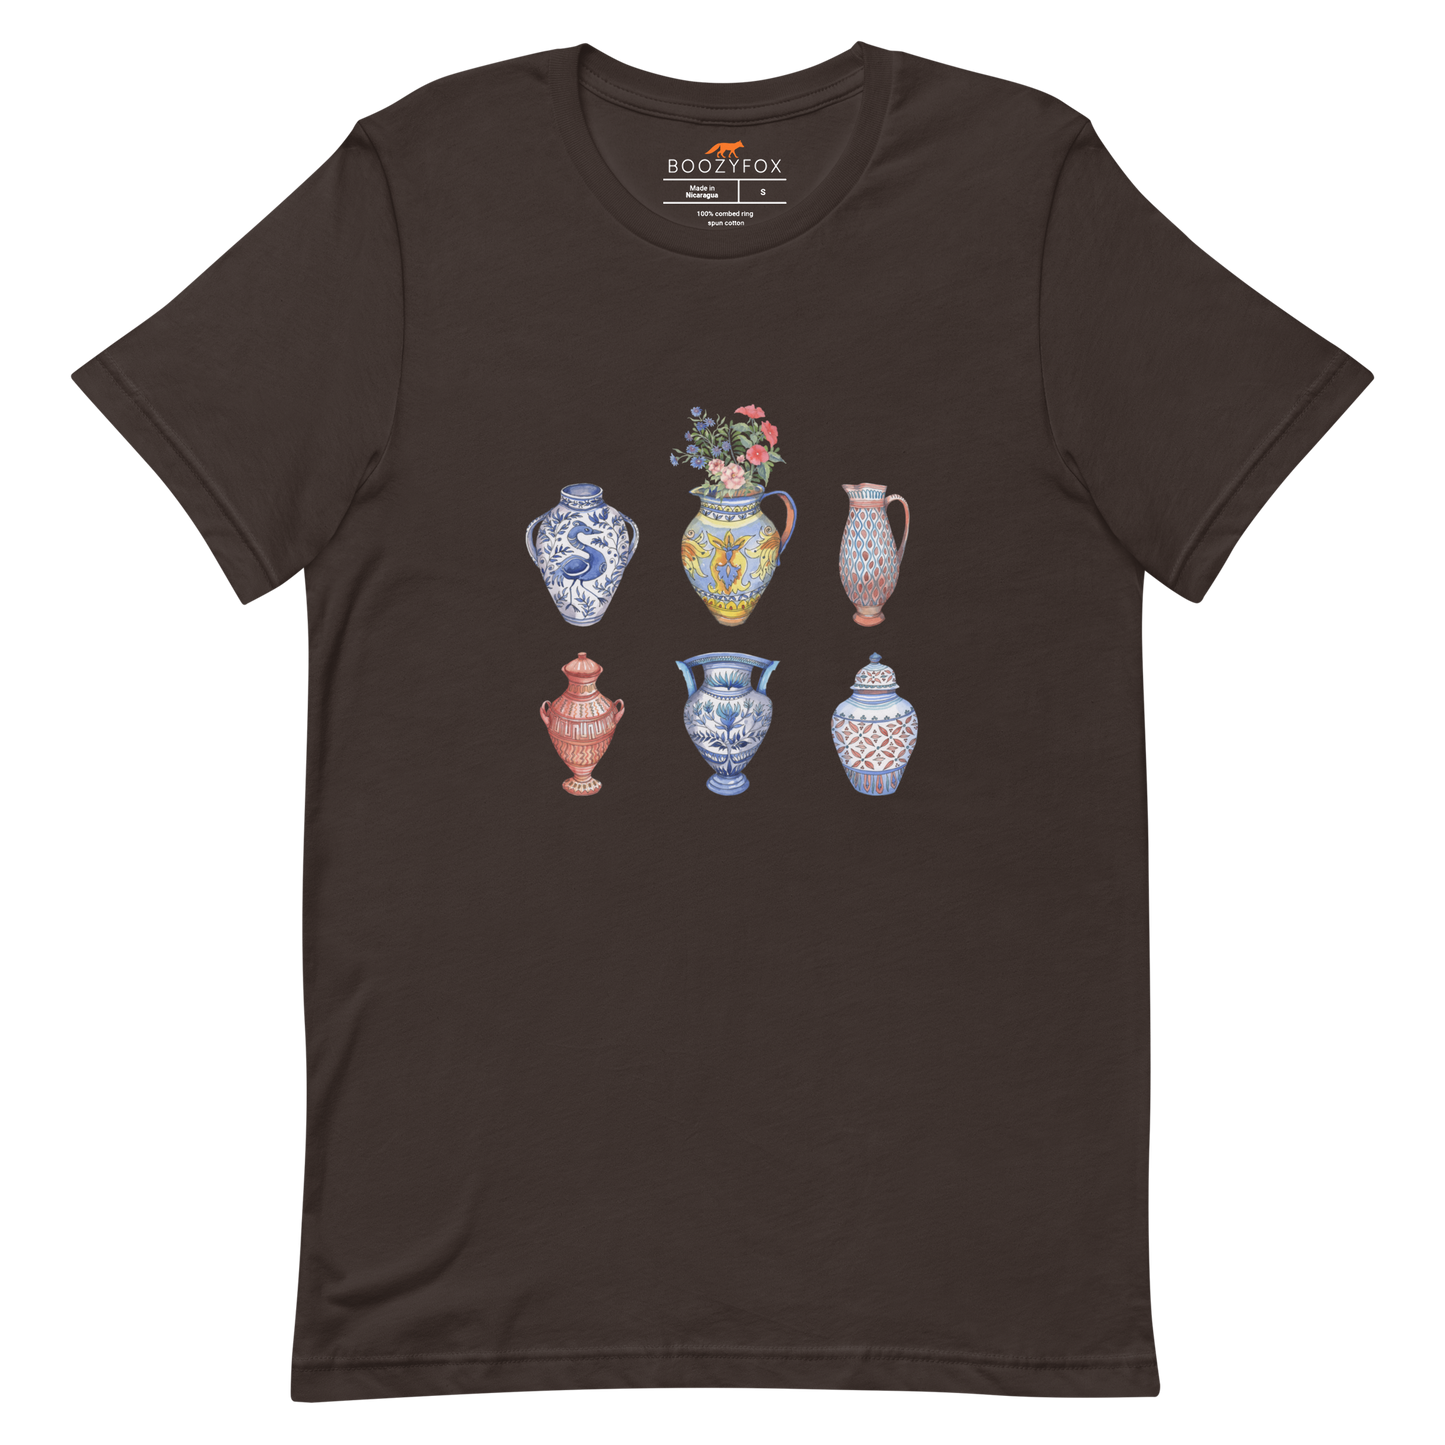 Brown Premium Vase Tee featuring a chic vase graphic on the chest - Artsy Graphic Vase Tees - Boozy Fox